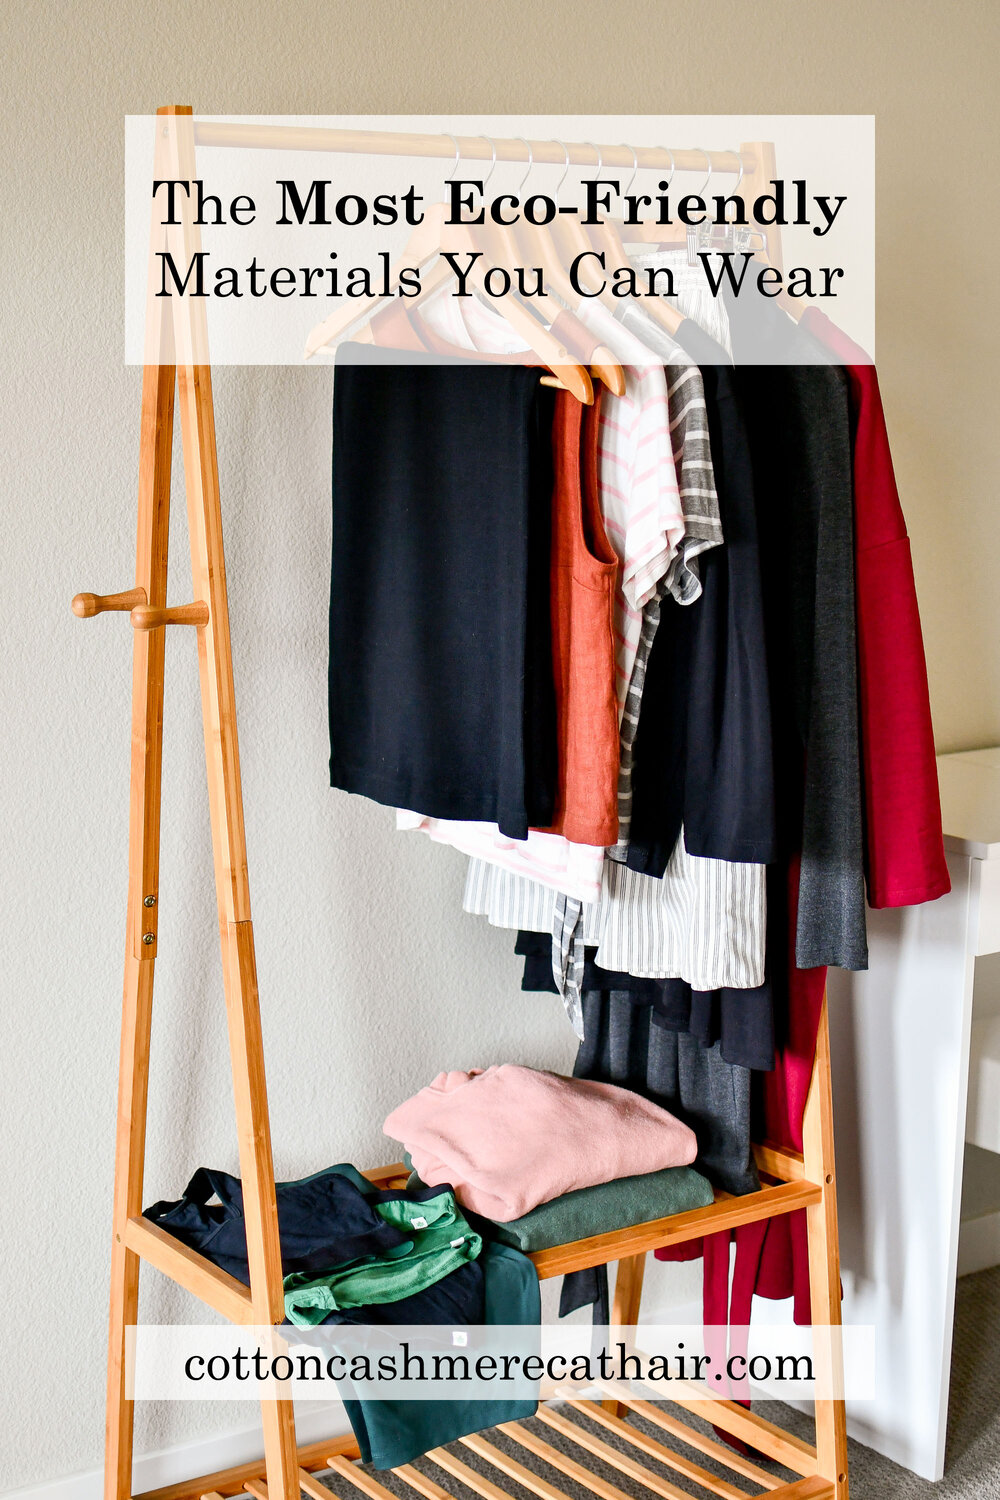 The most eco-friendly materials you can wear